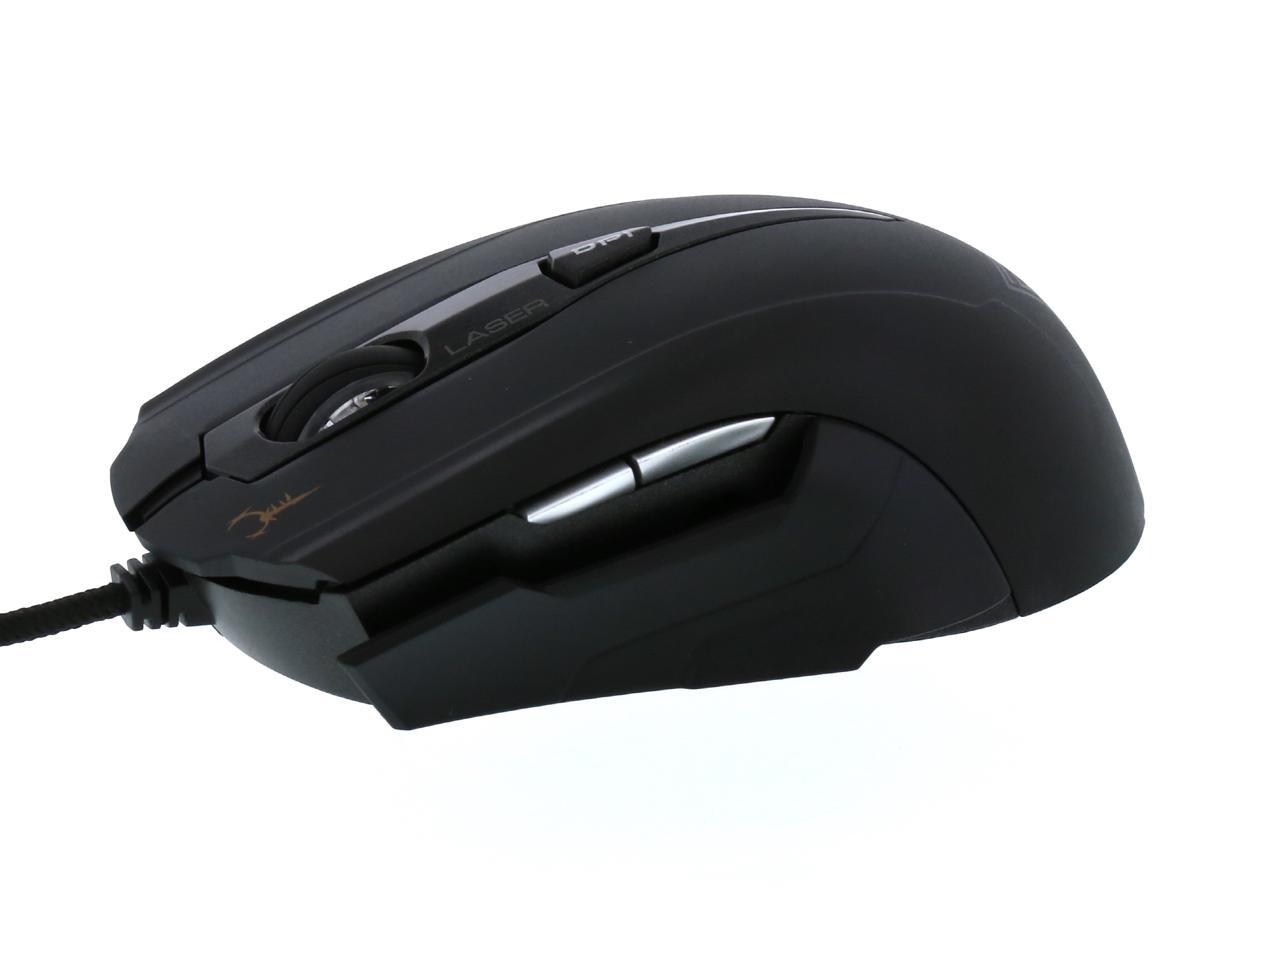 GAMDIAS HADES Extension GMS7011 Black Wired Laser Gaming Mouse - Newegg.com